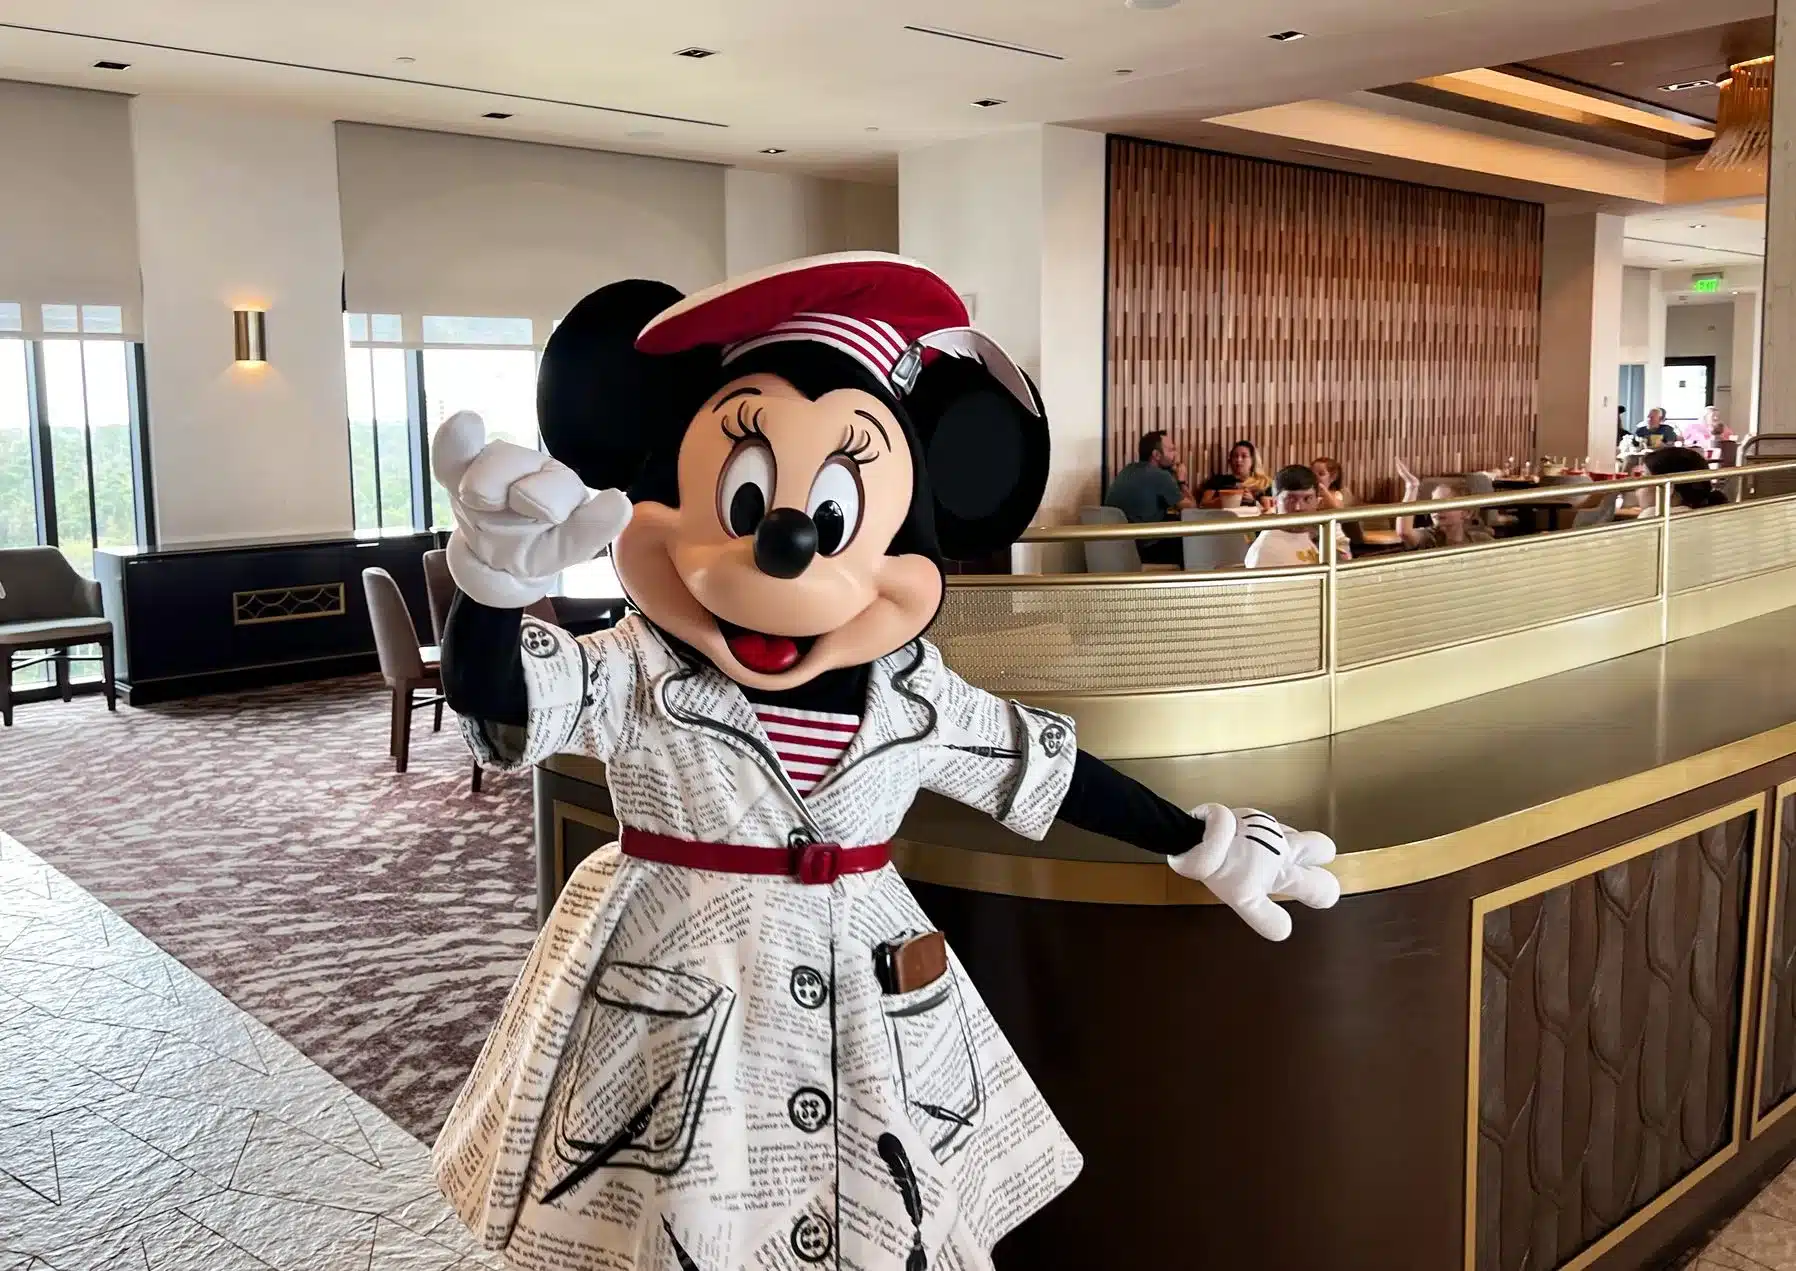 Minnie Mouse - Topolino's Terrace - Hardest to Get Reservations at Disney World